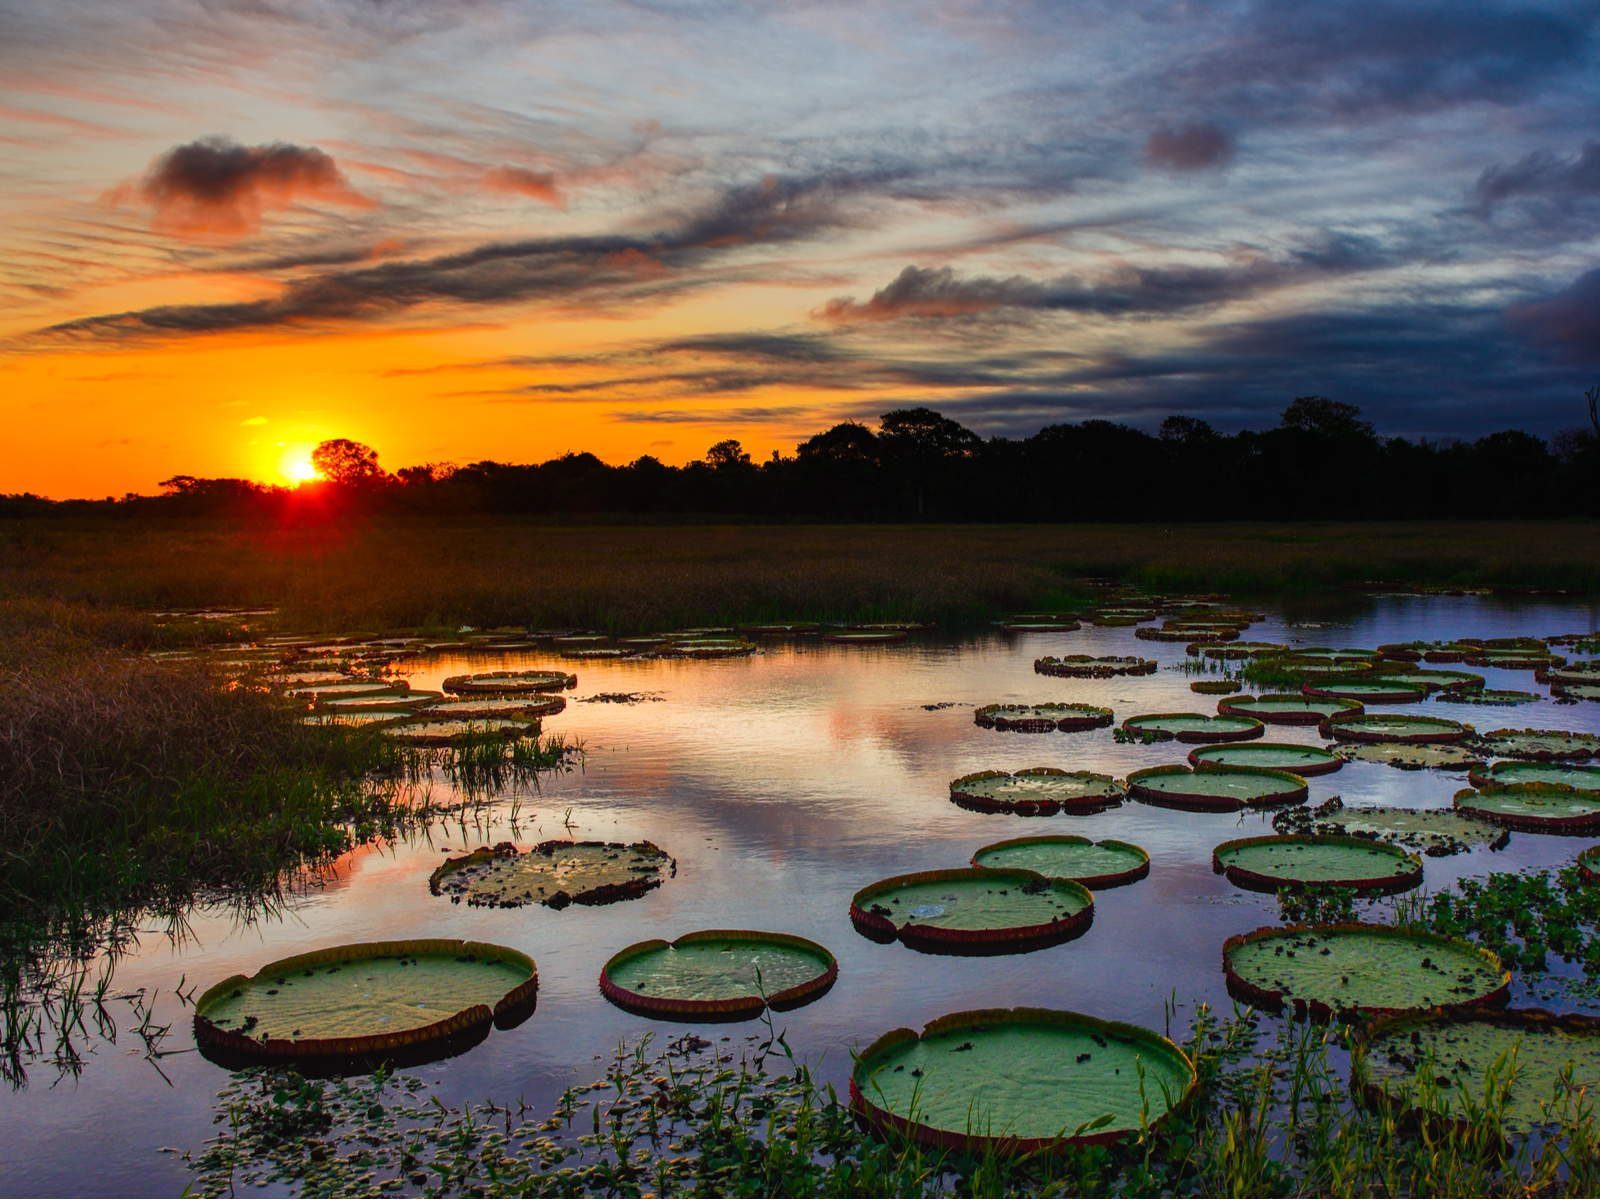 Sunset over a lake filled with lily pads pictured during the least busy time to visit Brazil